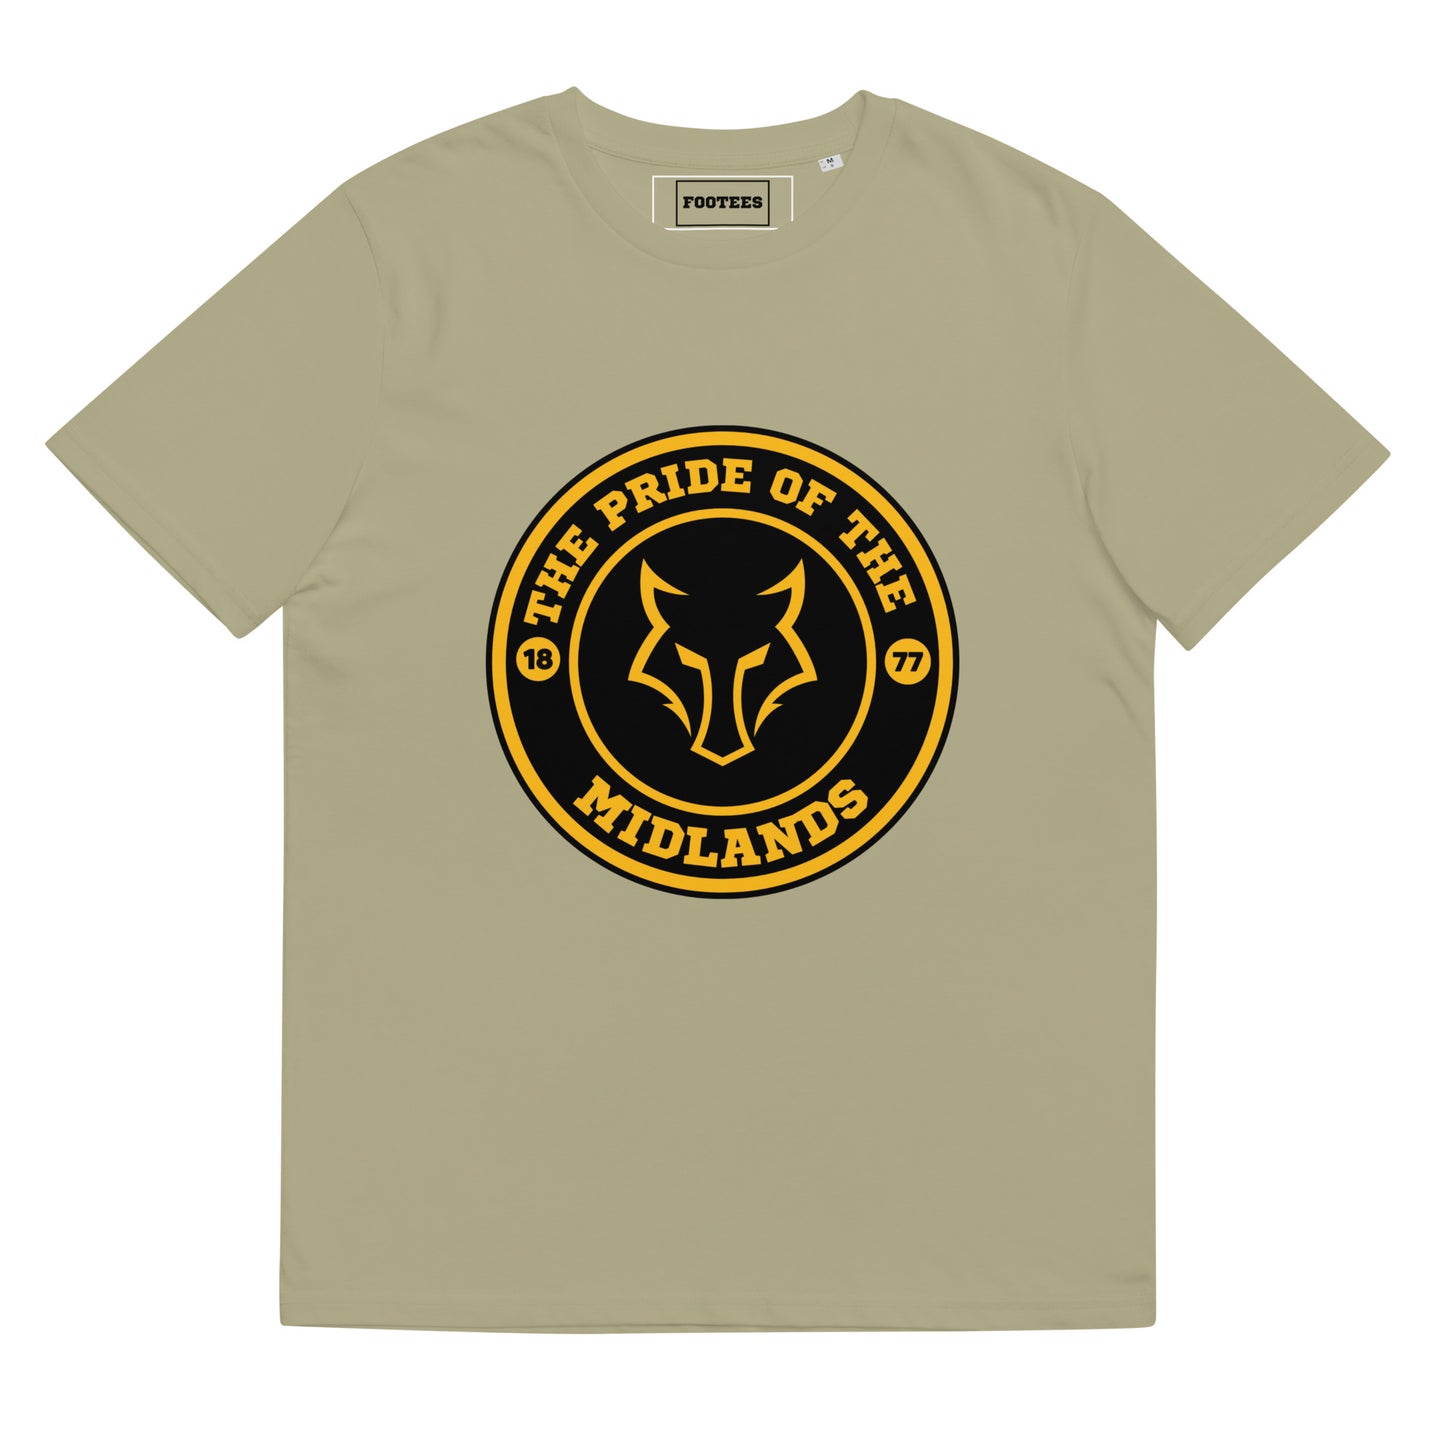 The Pride of the Midlands WWFC Tee